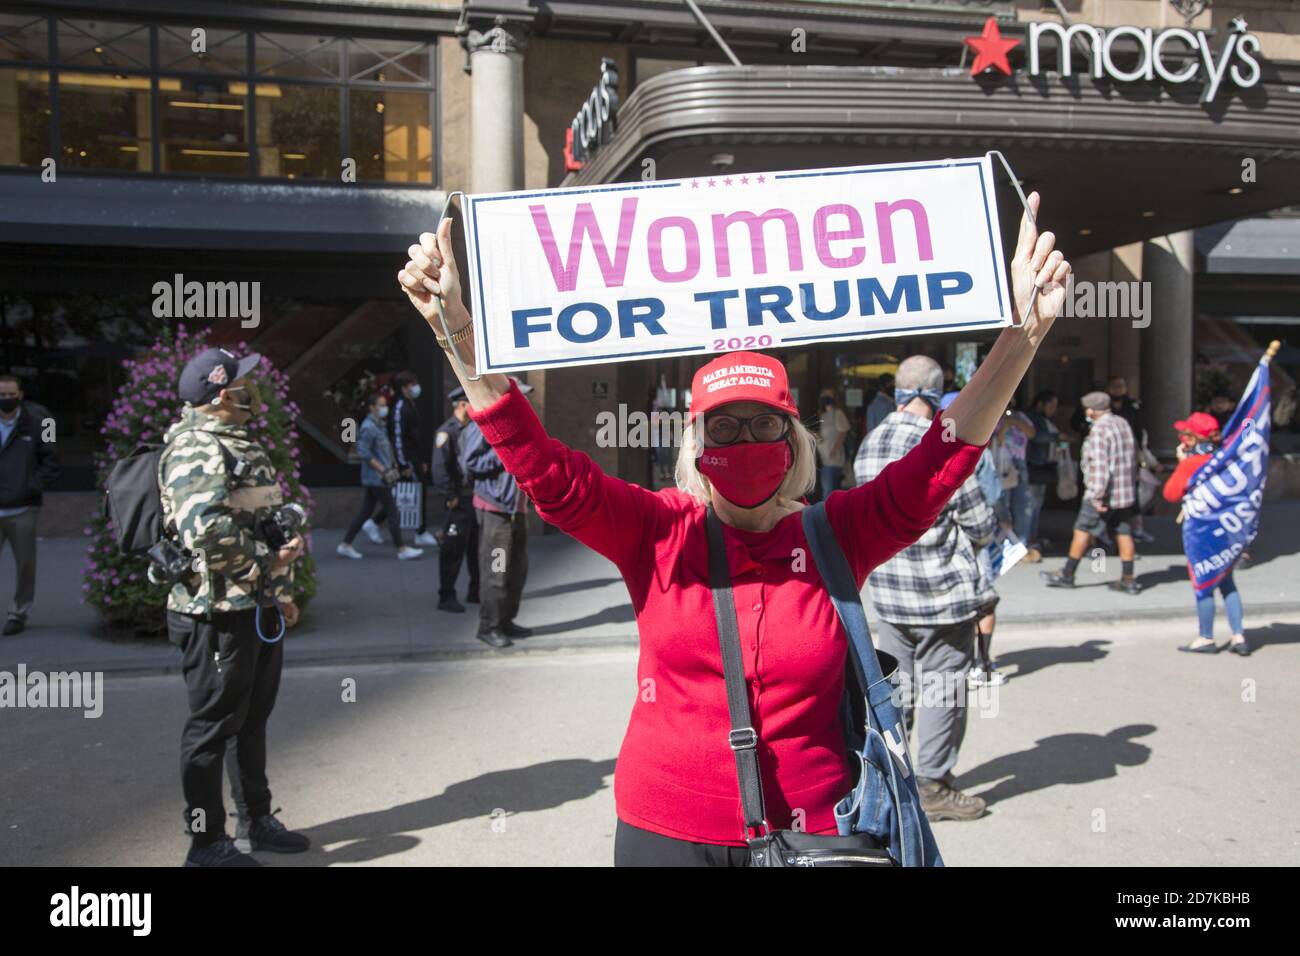 Pro Trump supporters rally on Broadway by Macy's Department Store in New York City. Stock Photo